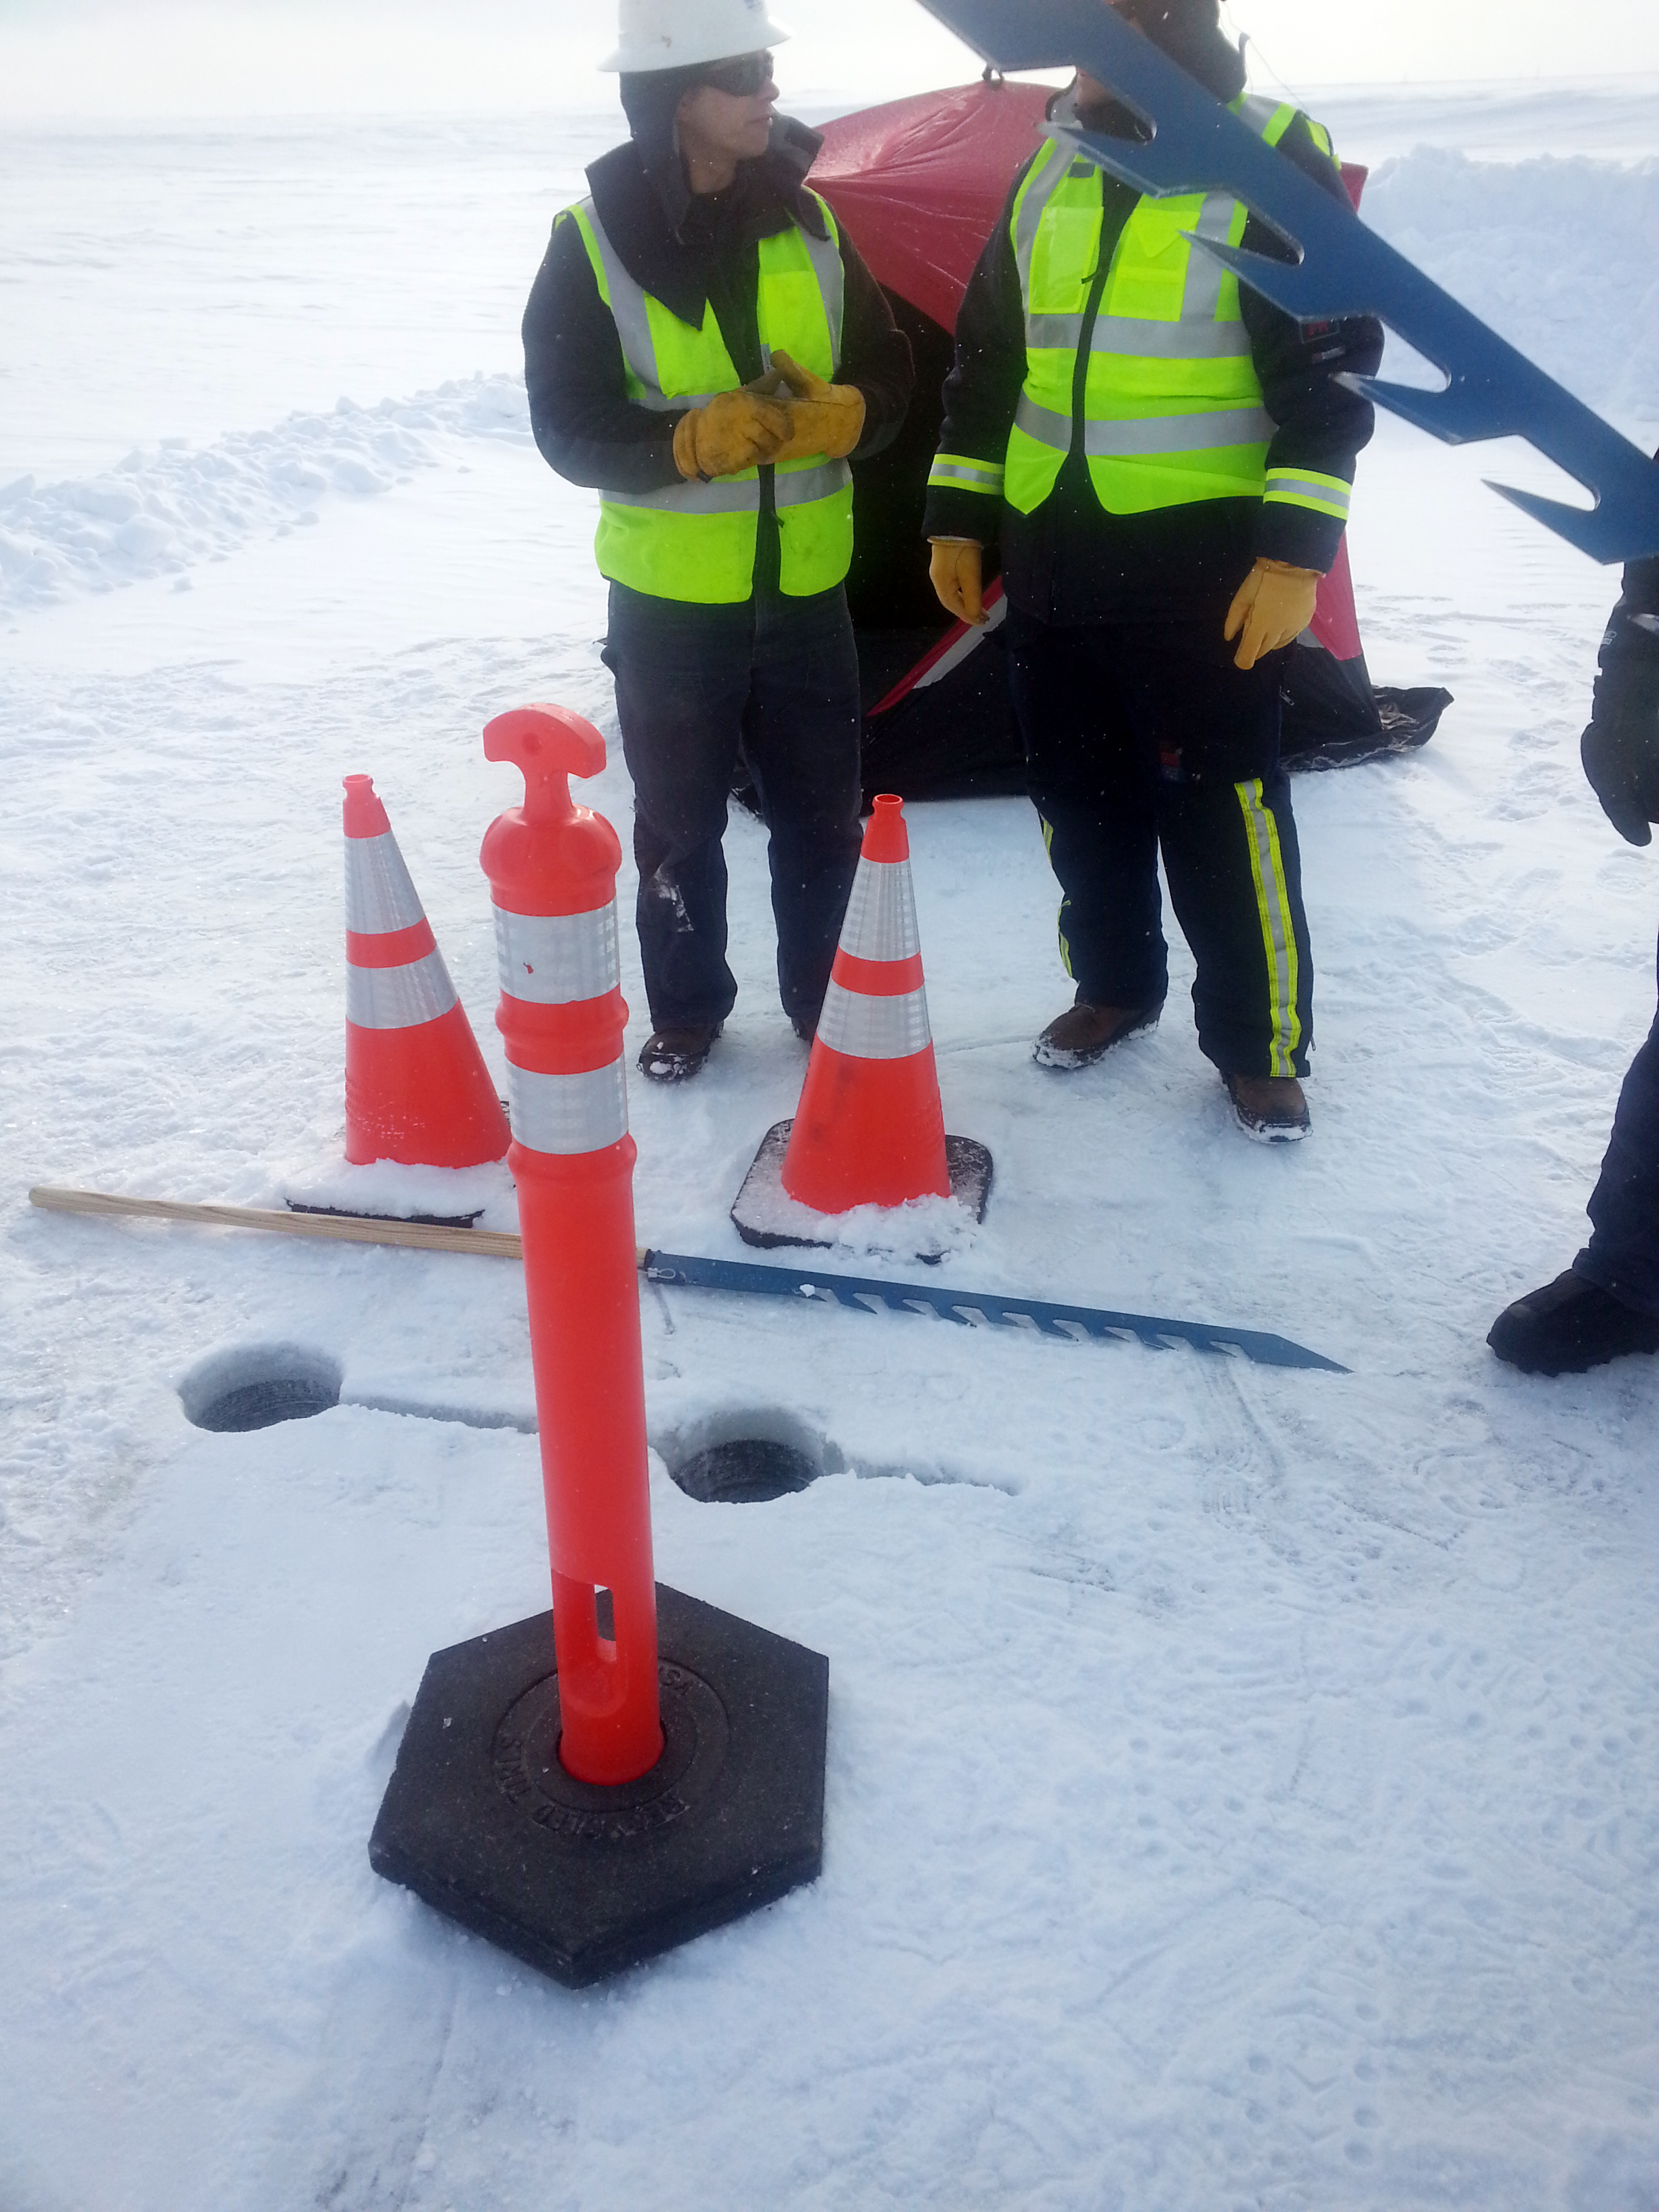 SWS Environmental Services employees at Alaska Clean Seas arctic oil spill response training in Prudhoe Bay, Alaska.